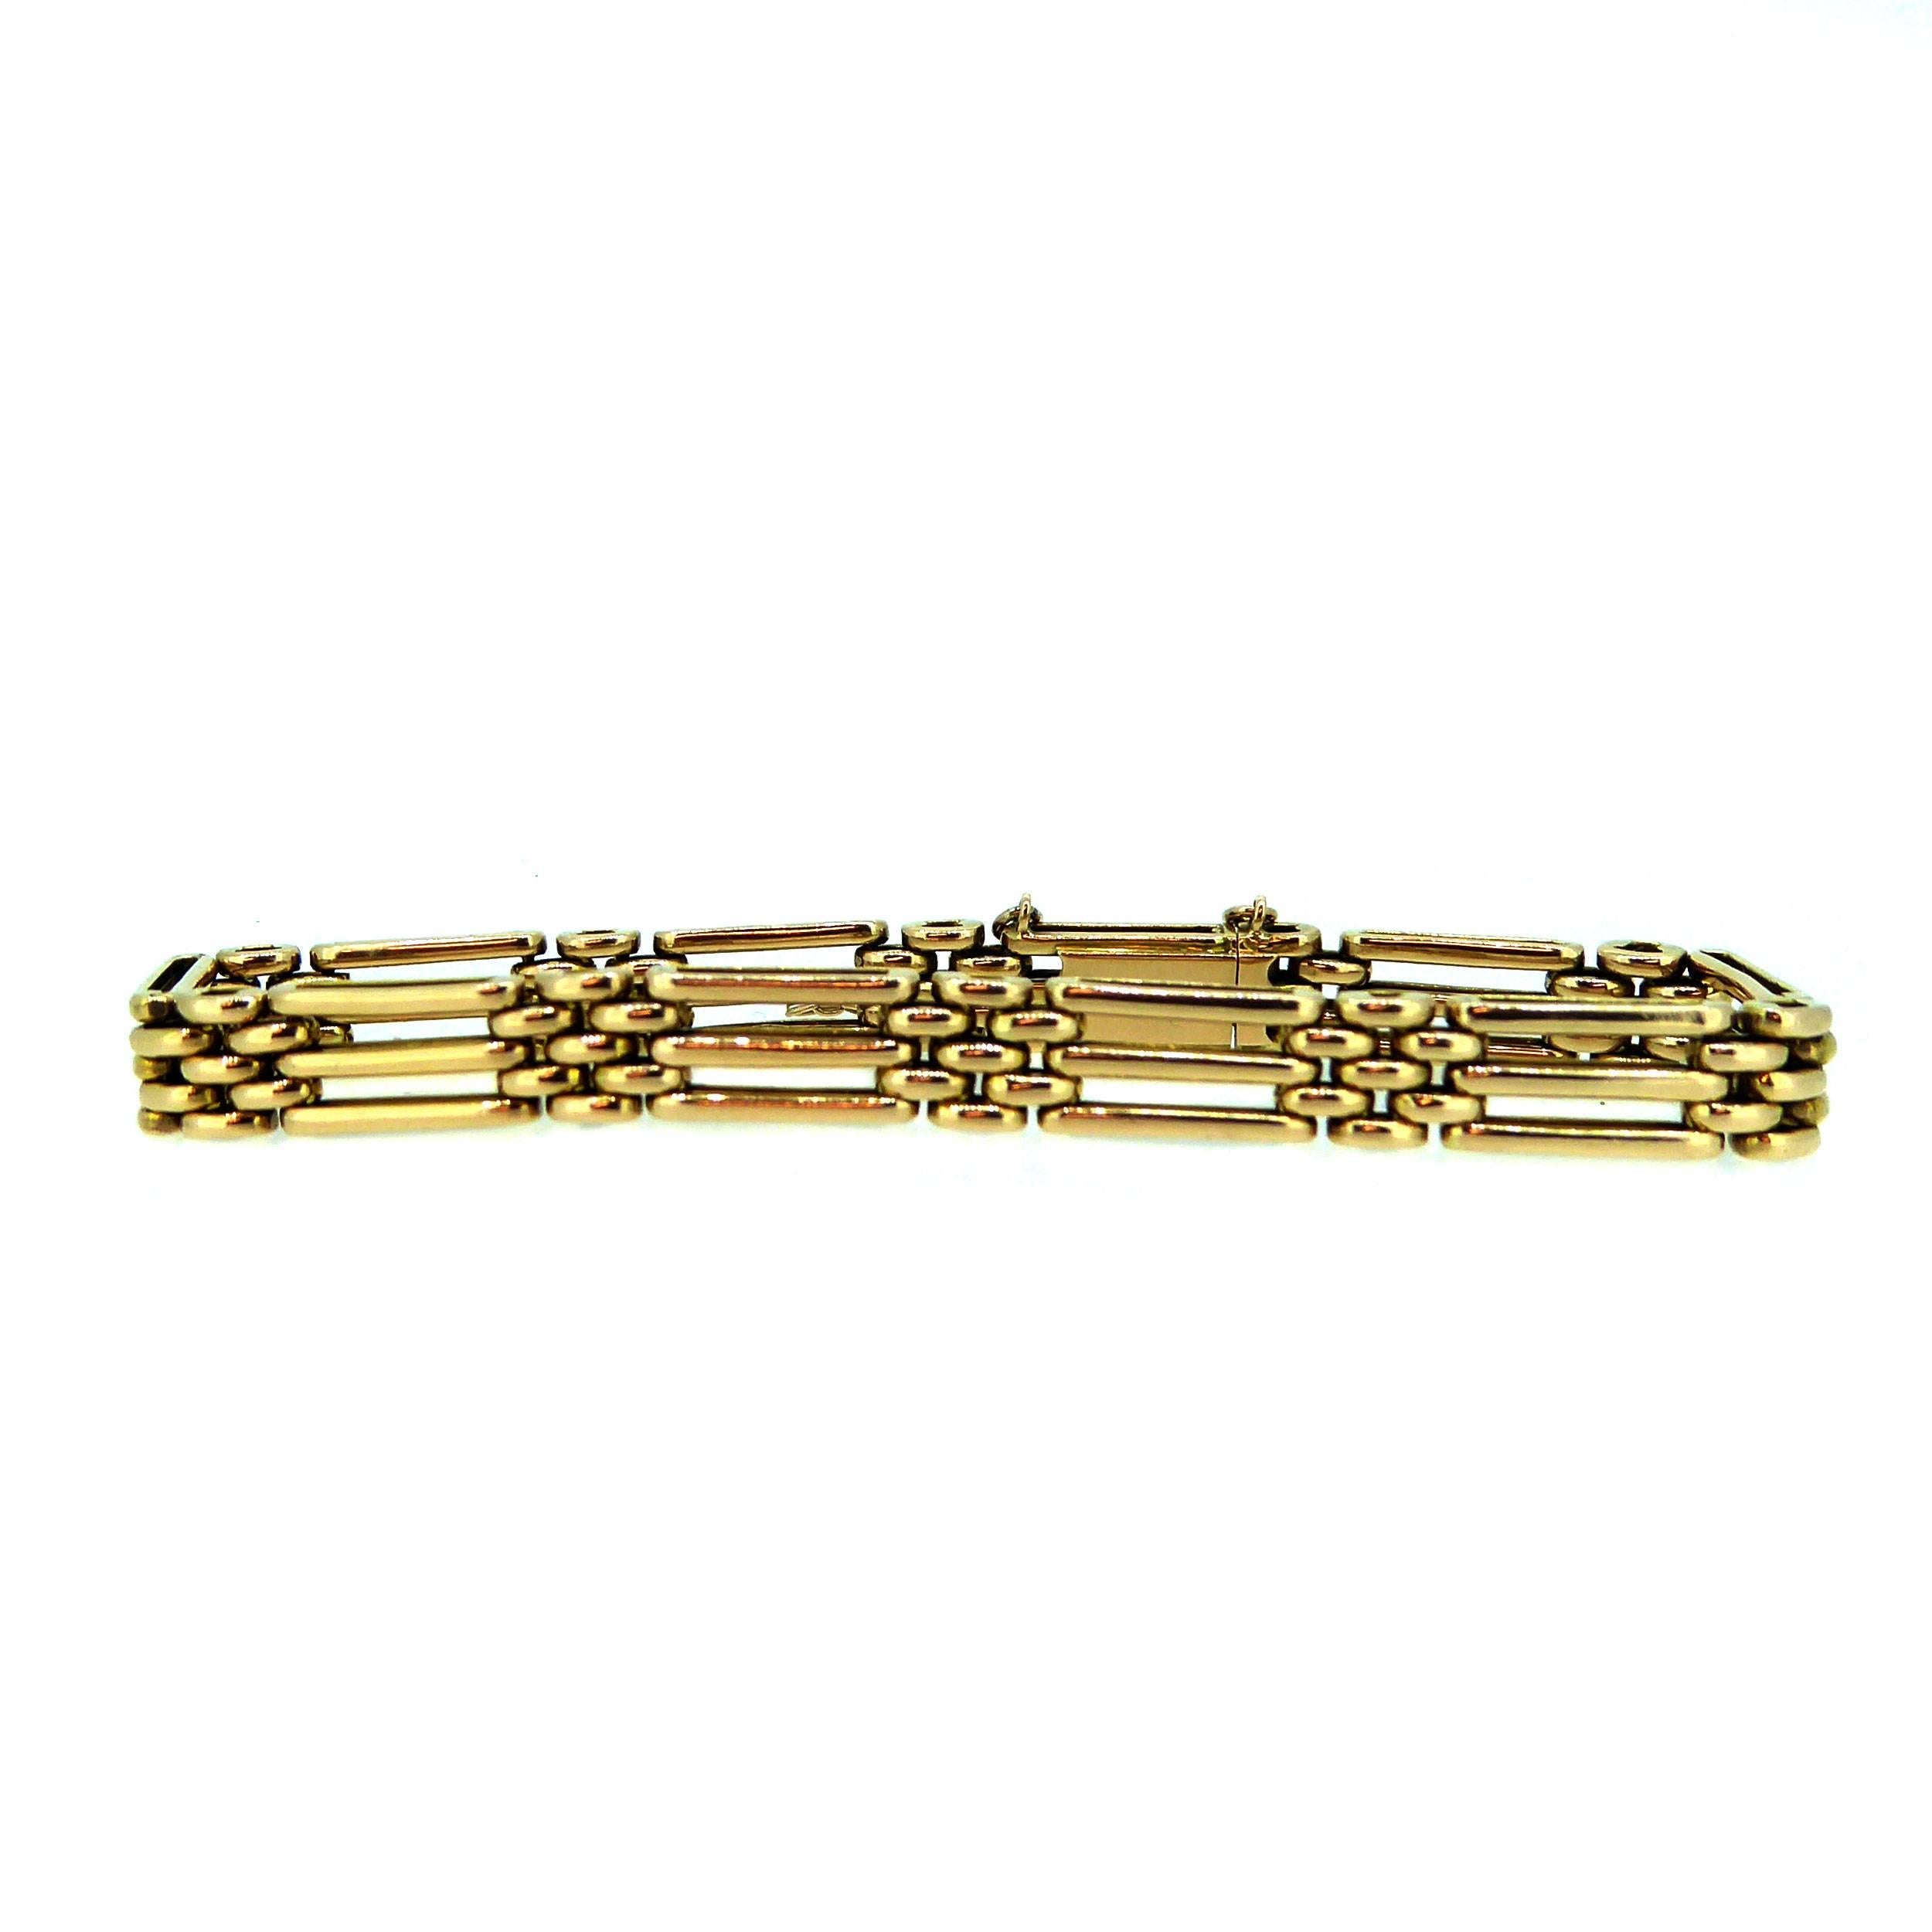 Antique gold bracelet in the popular 'gate' style having 10 'gates' of three plain polished, rounded oblong links approx. 0.5 inch long.  Each of the gates is connected by rounded links in a brick-work pattern approx. 0.38 inch long. The total